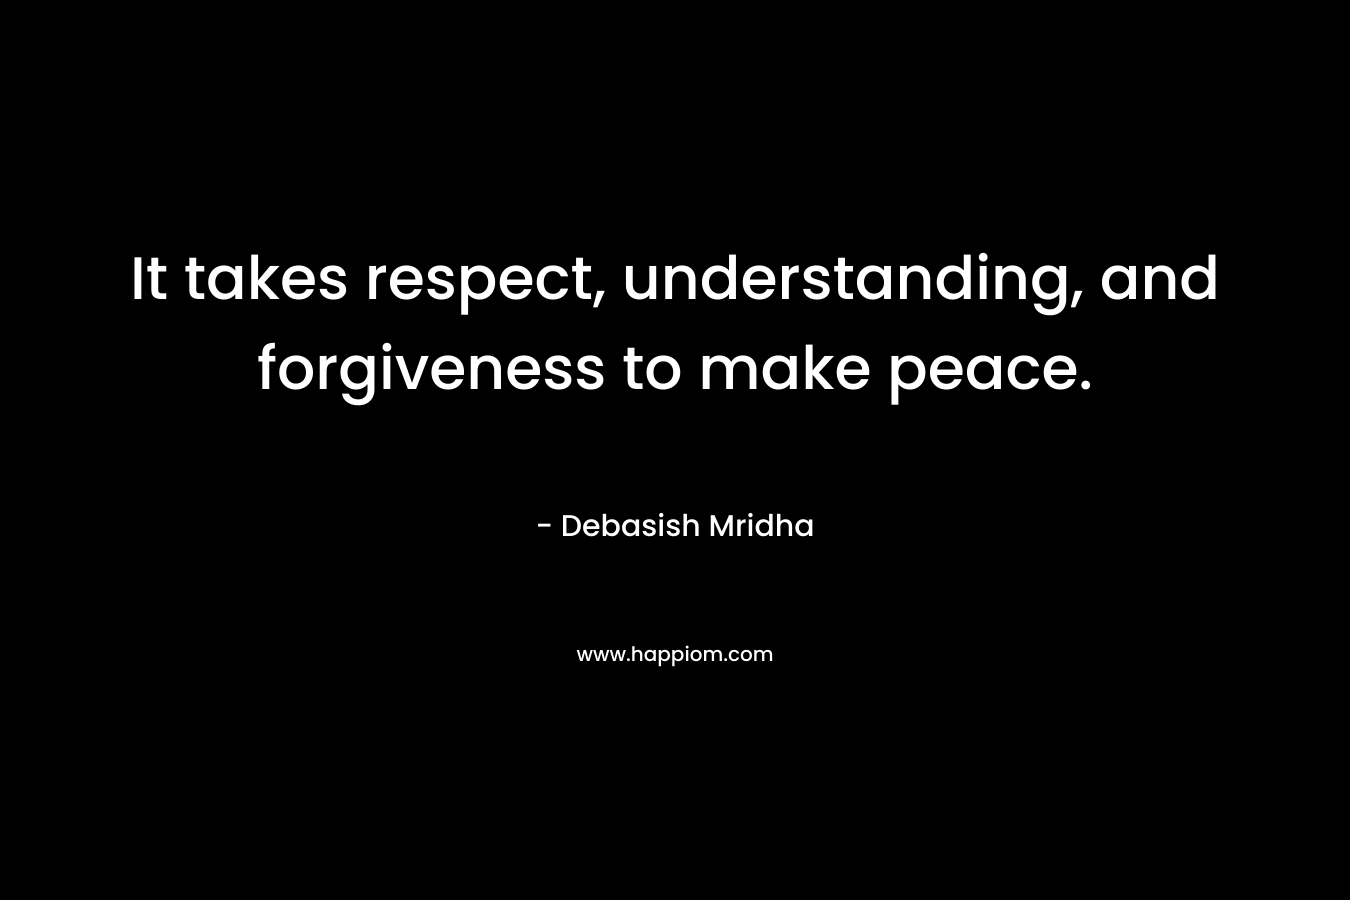 It takes respect, understanding, and forgiveness to make peace.